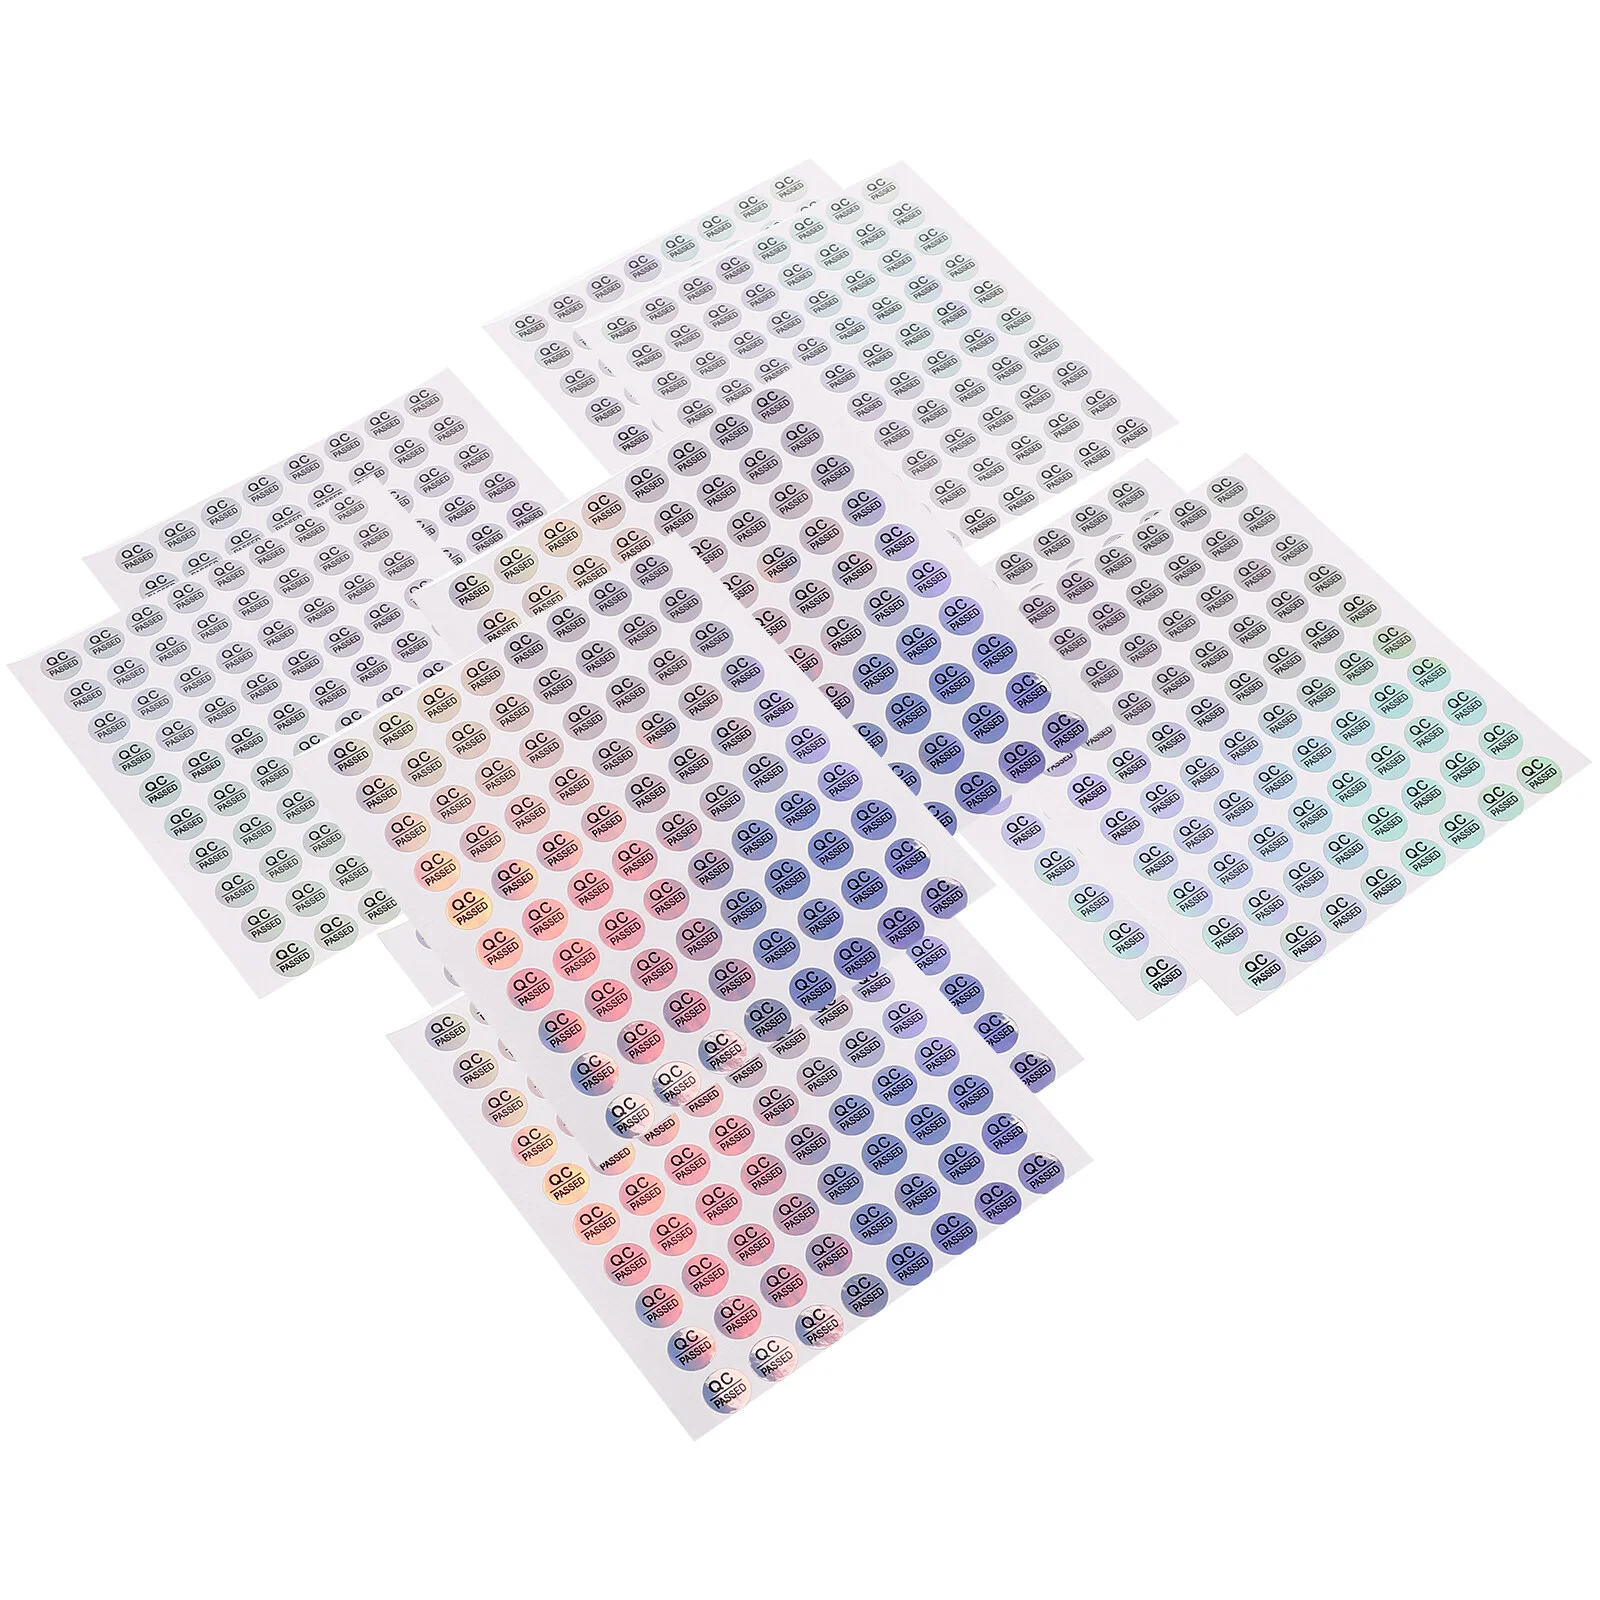 

800 Pcs Qc Pass Tag Colored Tabs Testing Applique Convenient Tags Pvc Self-adhesive Warehouse Passed Decals Tested Quality